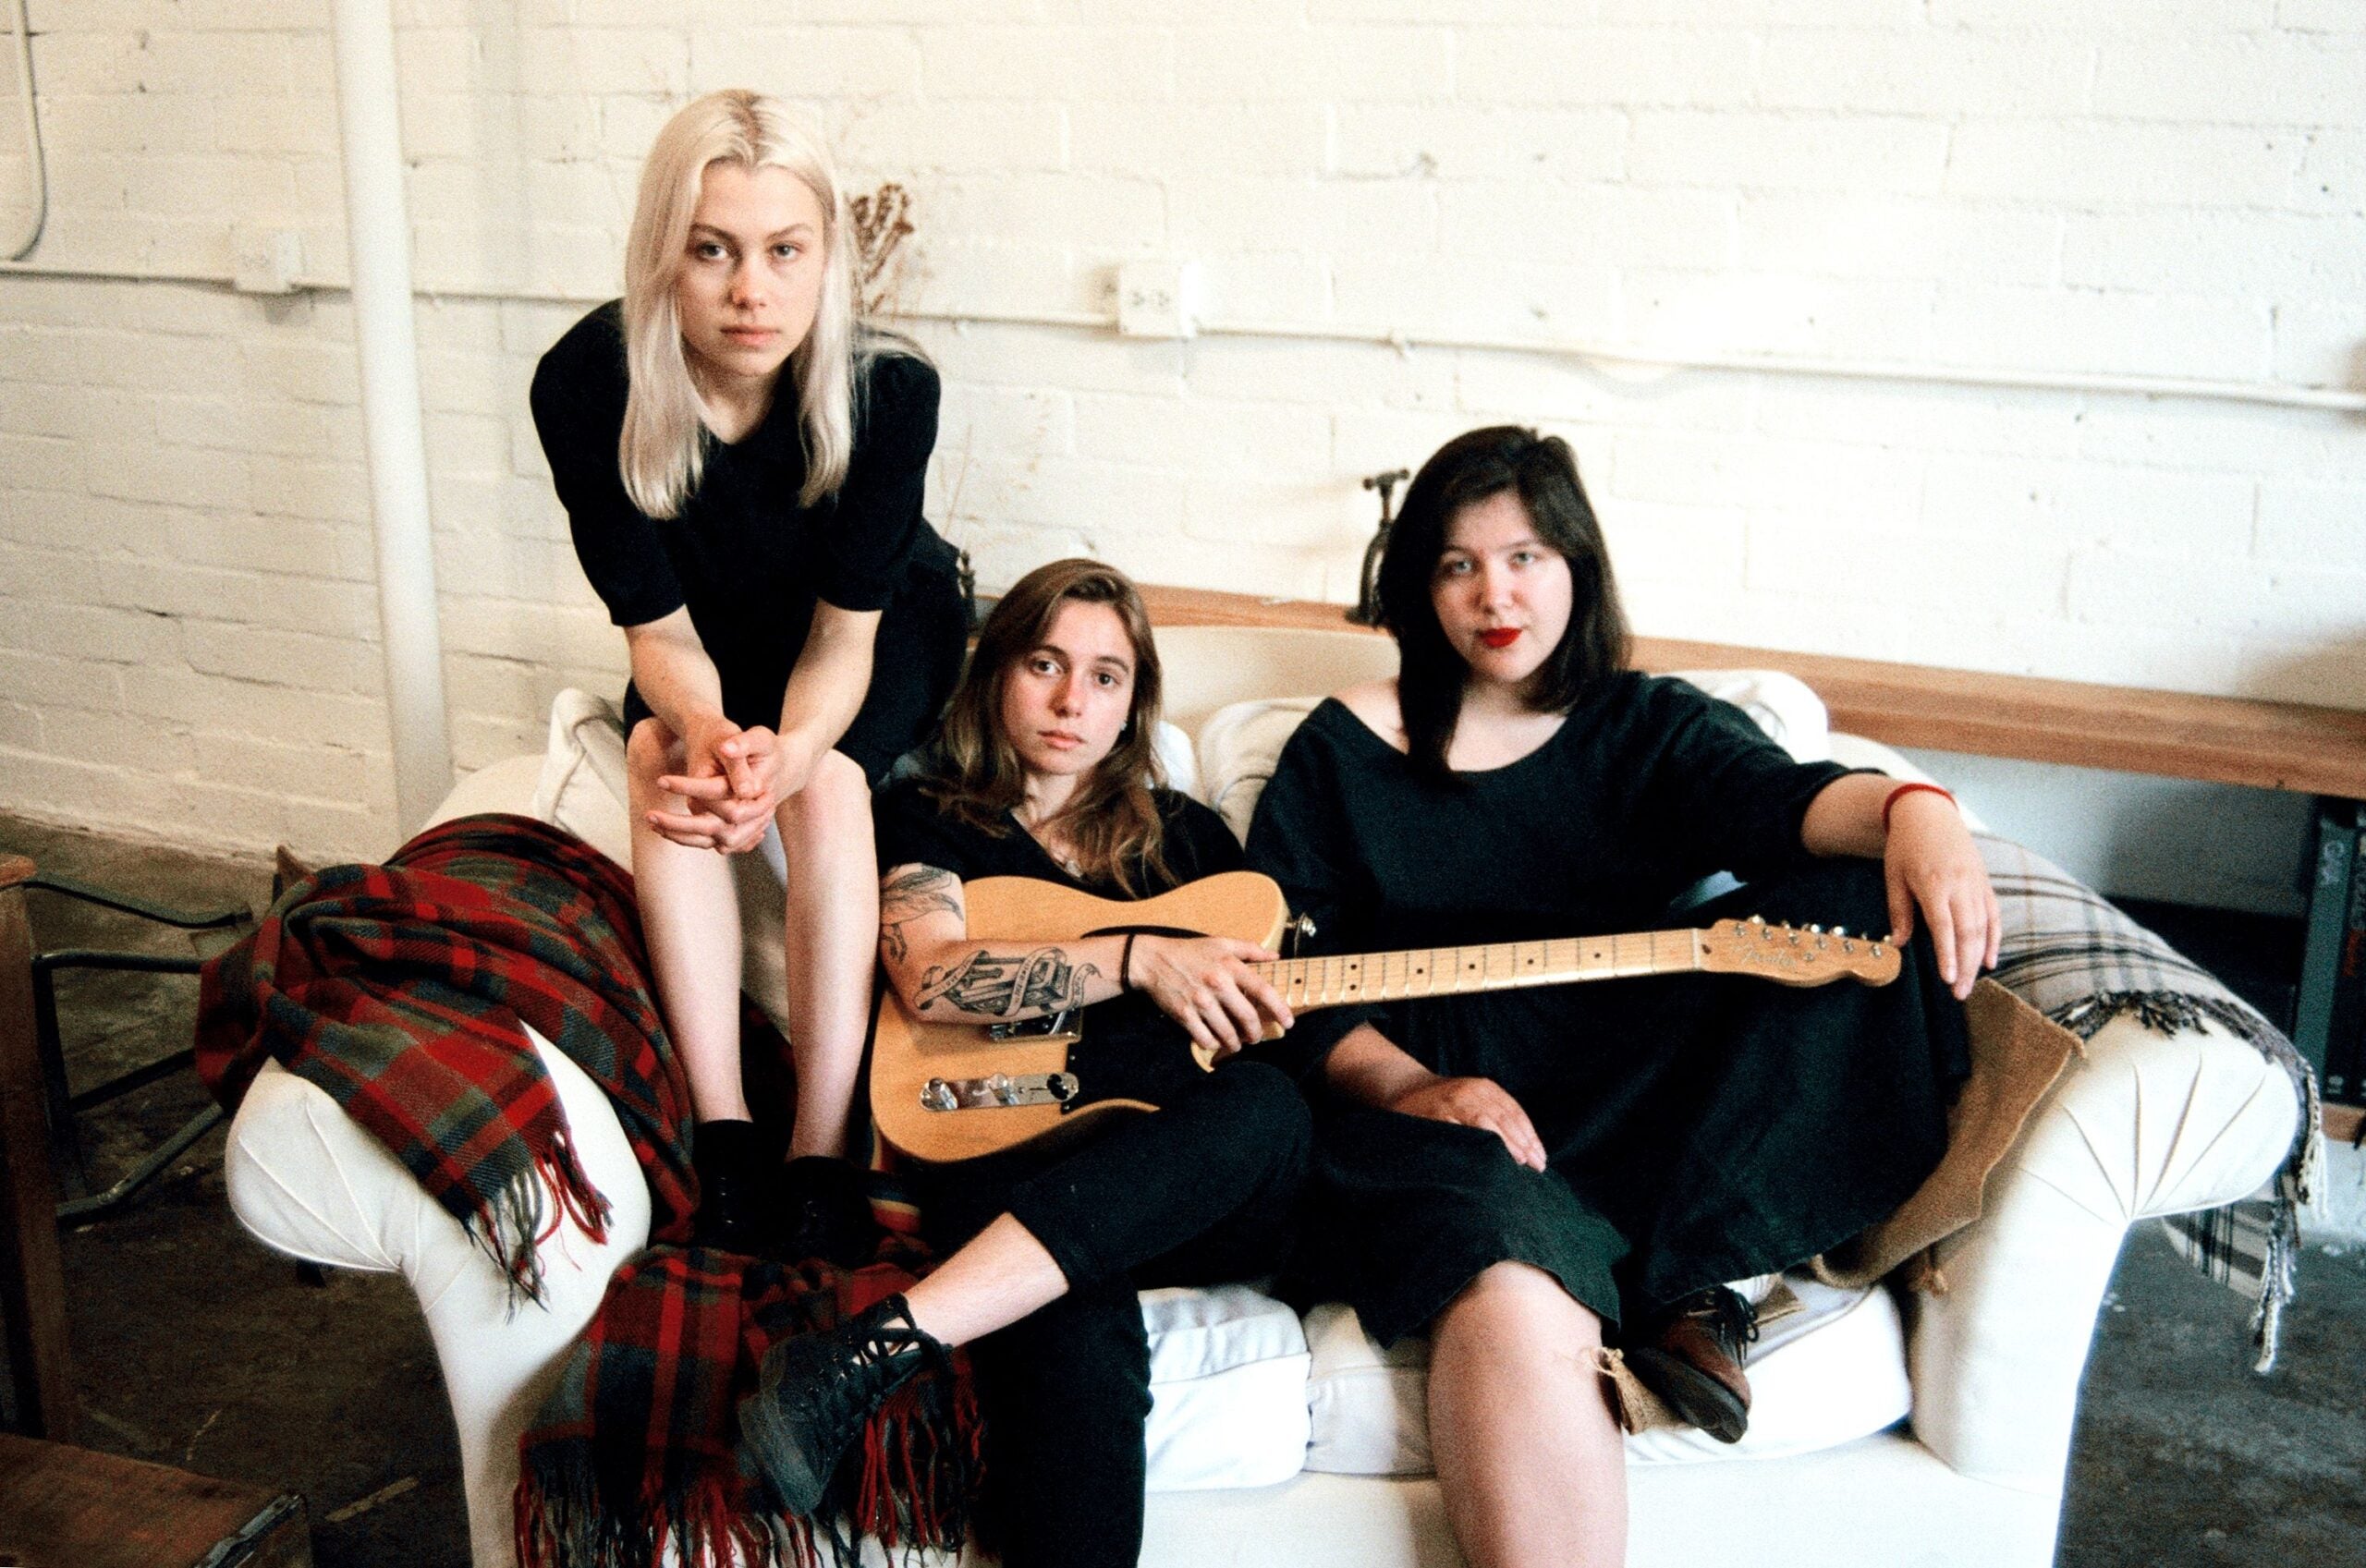 Boygenius, the trio of (from left) Phoebe Bridgers, Julien Baker, and Lucy Dacus, will headline The Stage at Suffolk Downs on June 18.